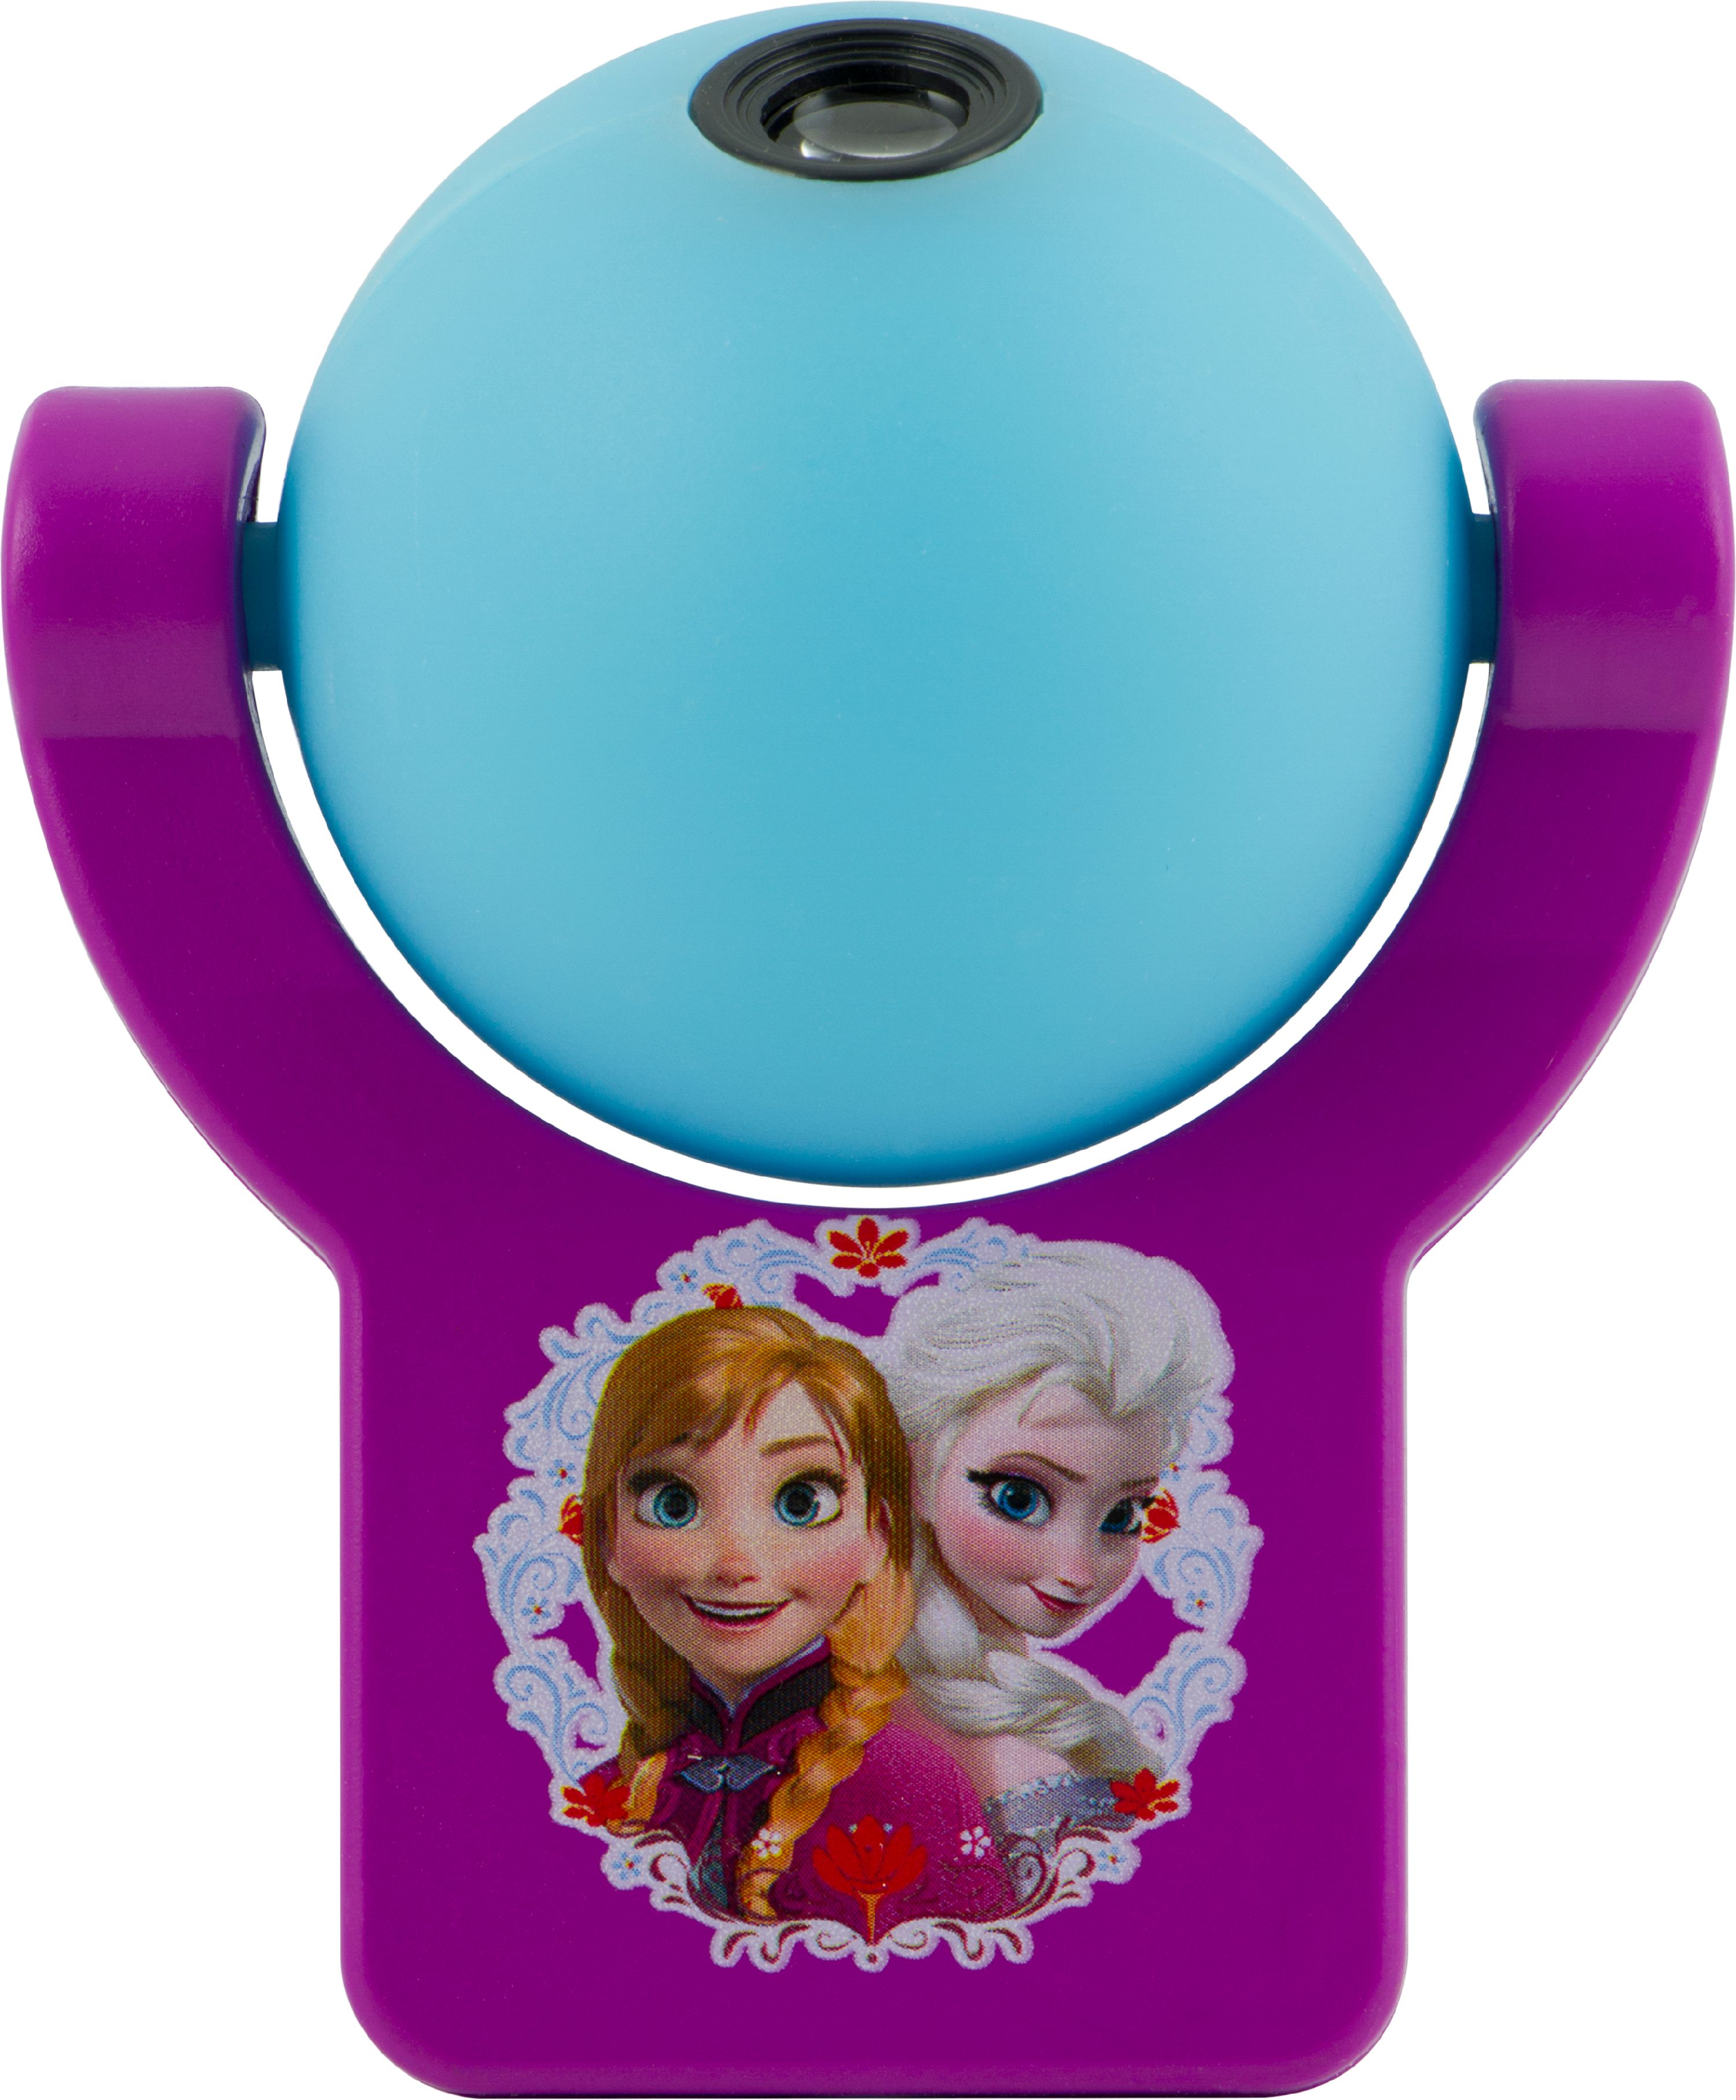 Projectables Disney Frozen LED Plug-In Night Light, Elsa & Anna, 13340 - image 4 of 5